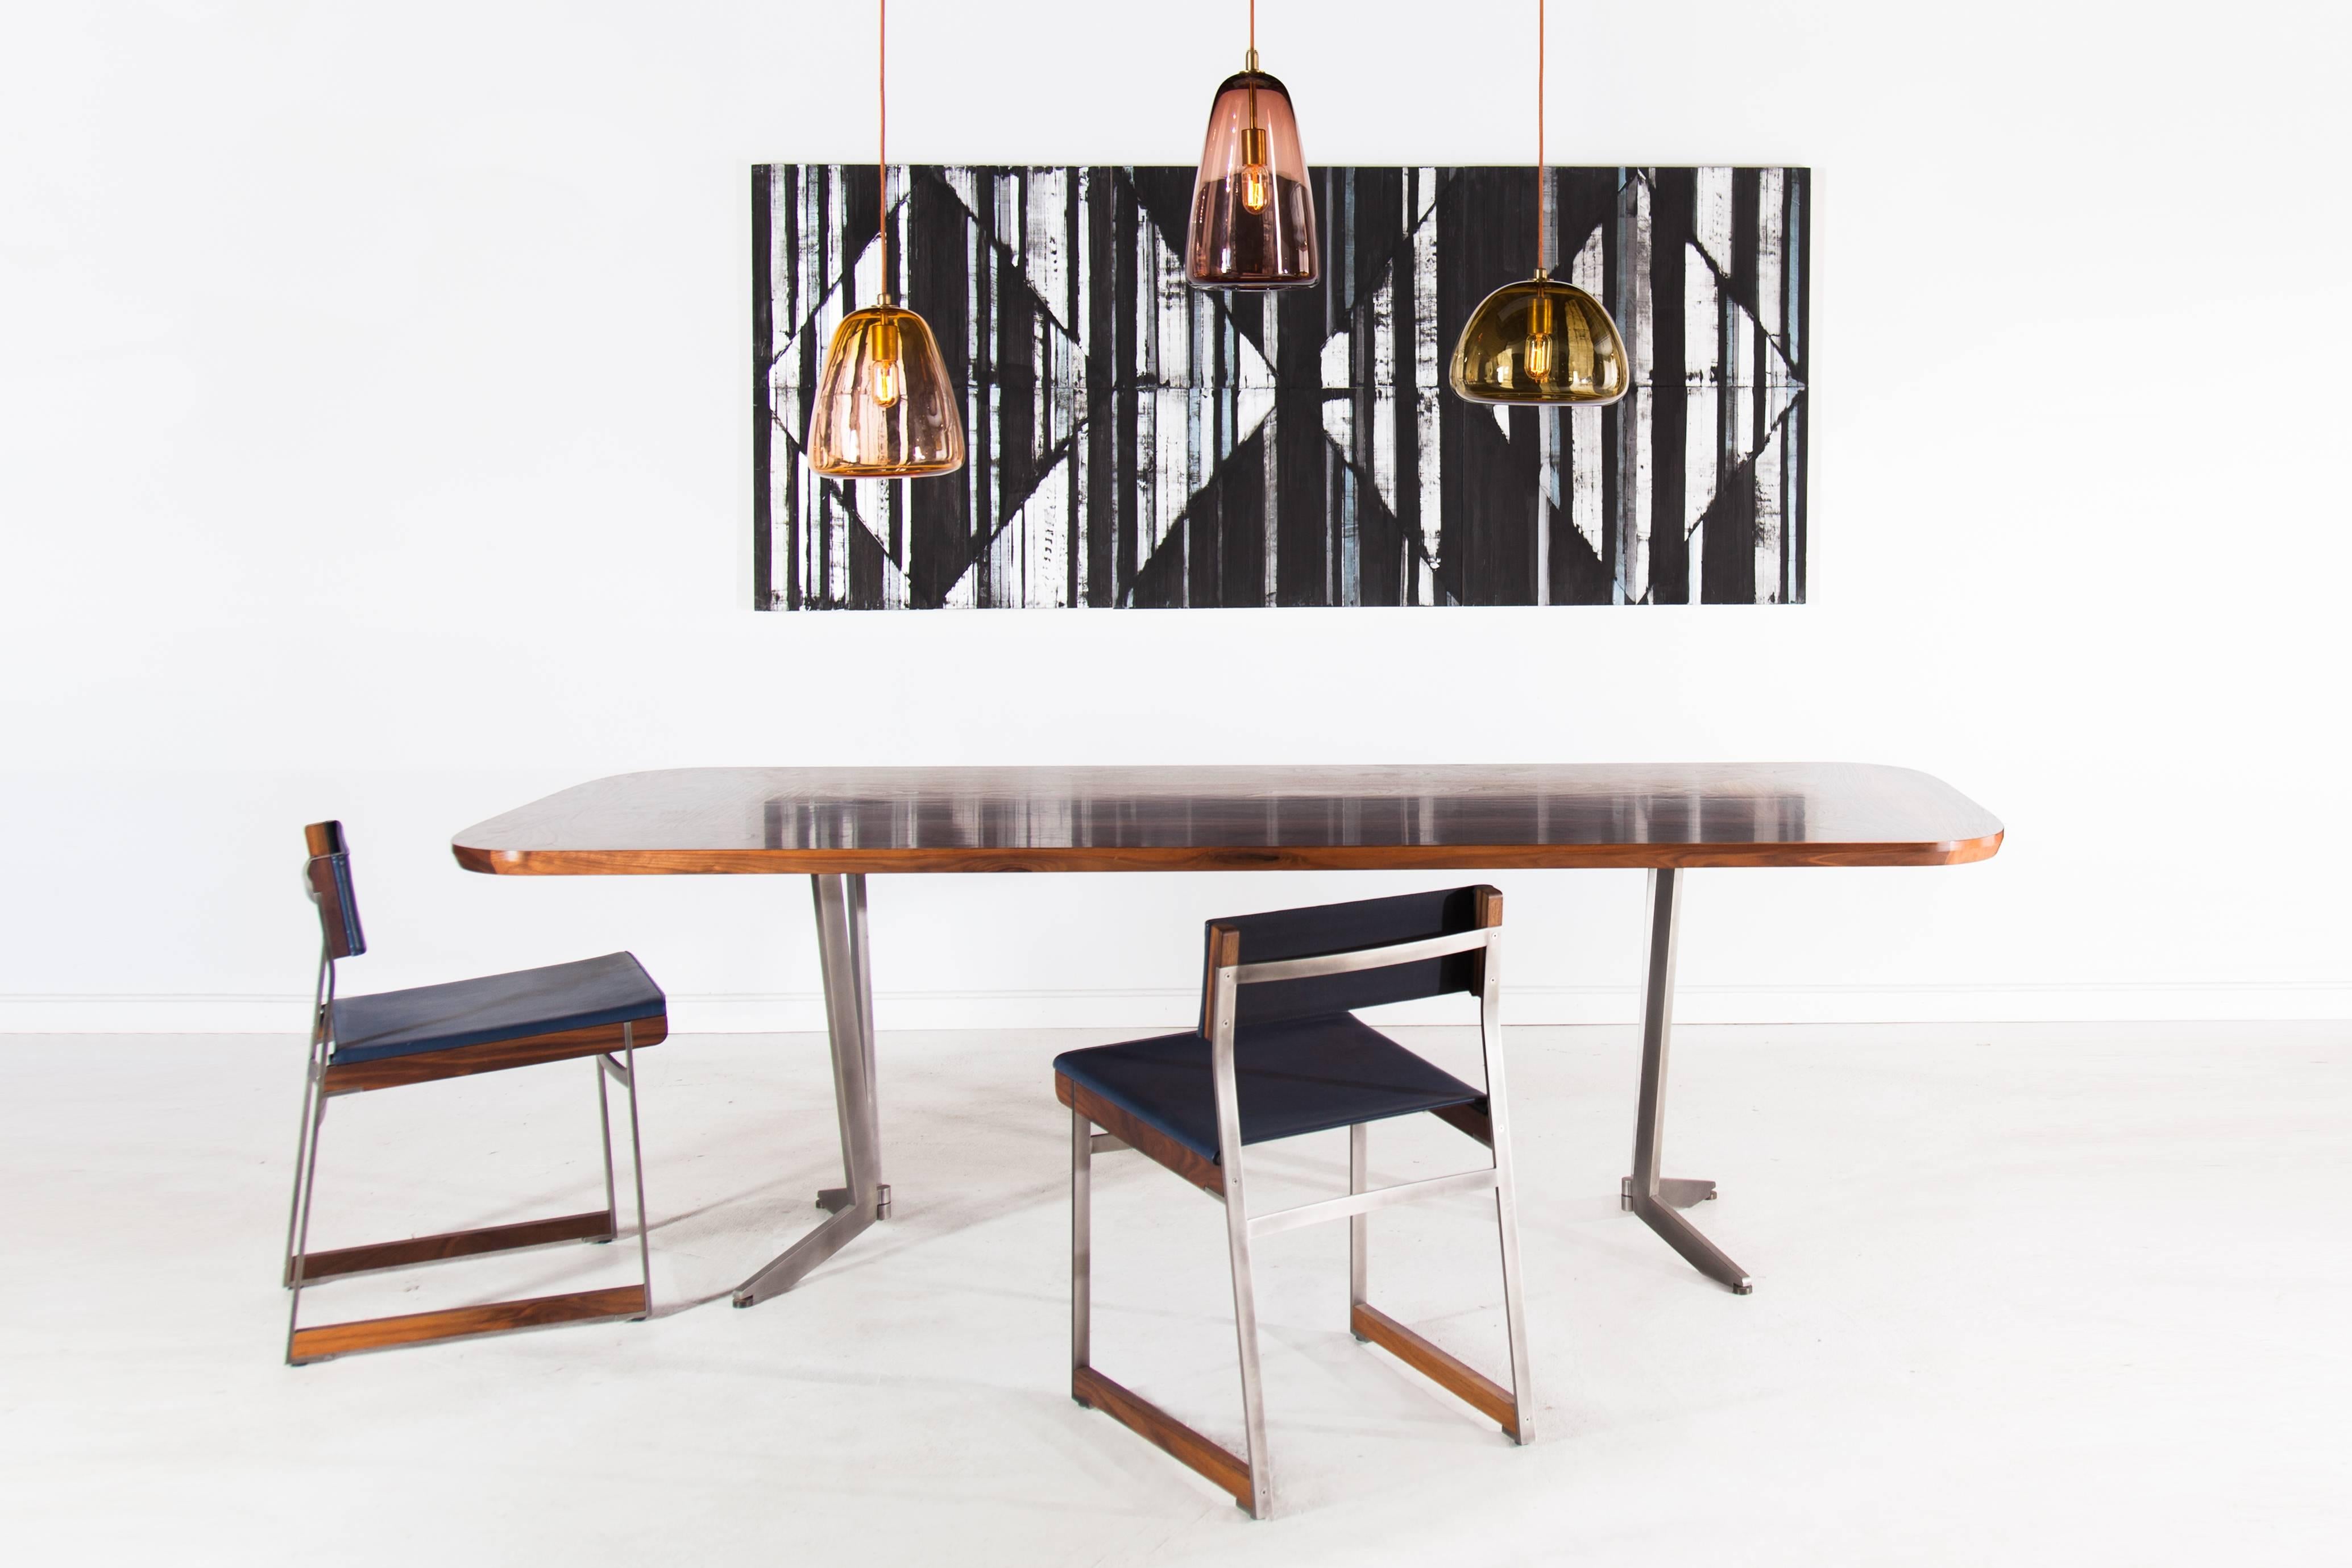 Inspired by op art and geometric textiles, the Barnet Table employs traditional marquetry techniques to merge furniture with painterly graphic images. Available in a variety of American hardwoods with surface patterns ranging from simple flat sawn